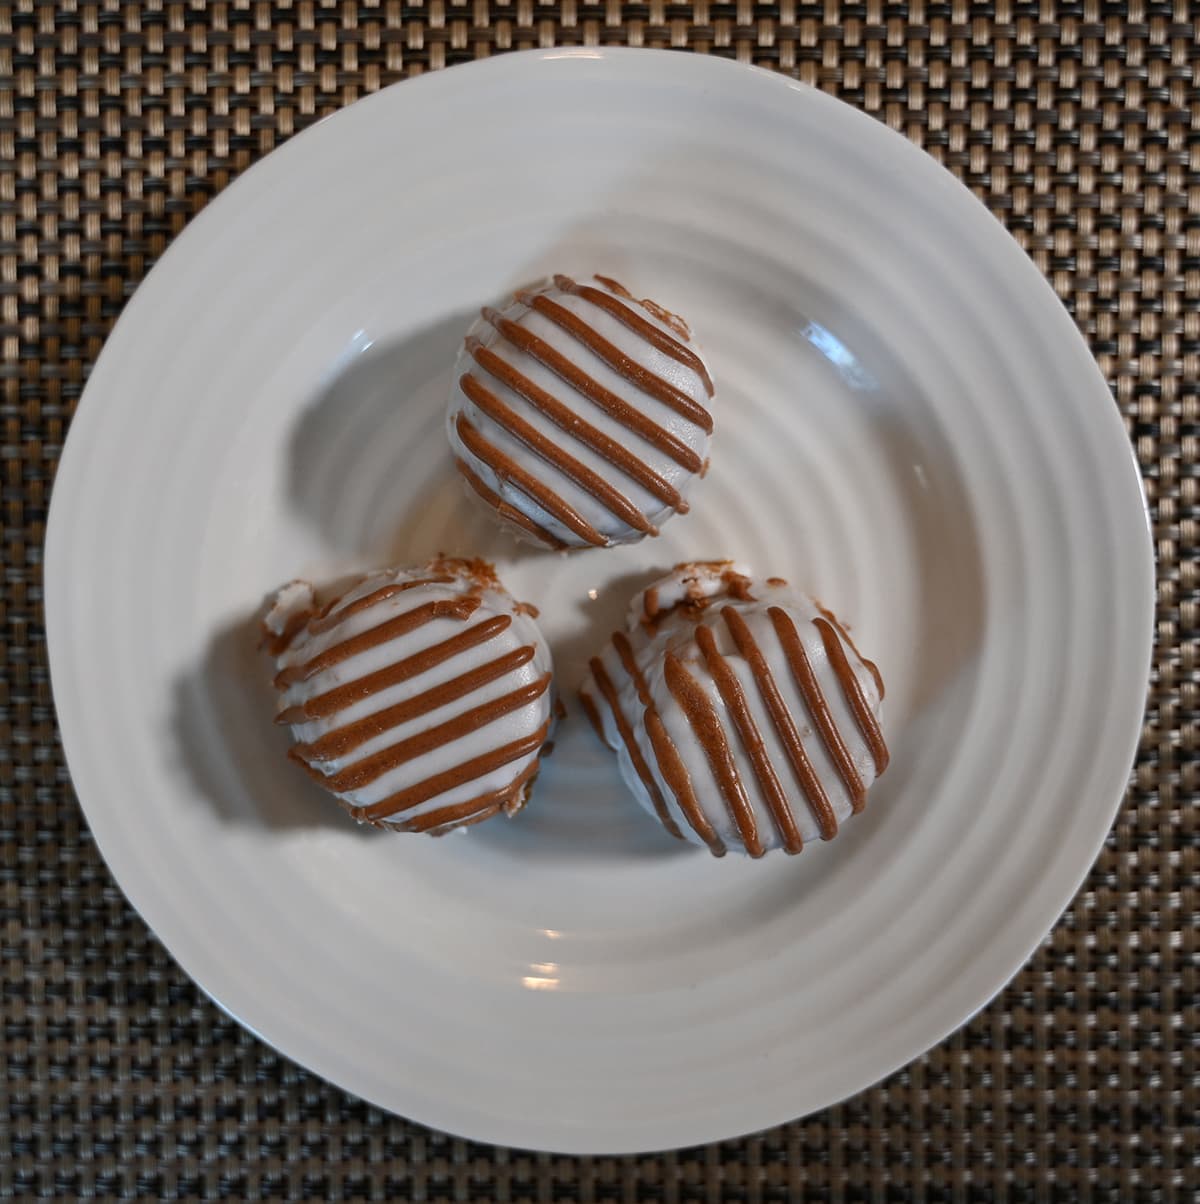 Top down image of three pumpkin spice bites served on a white plate.